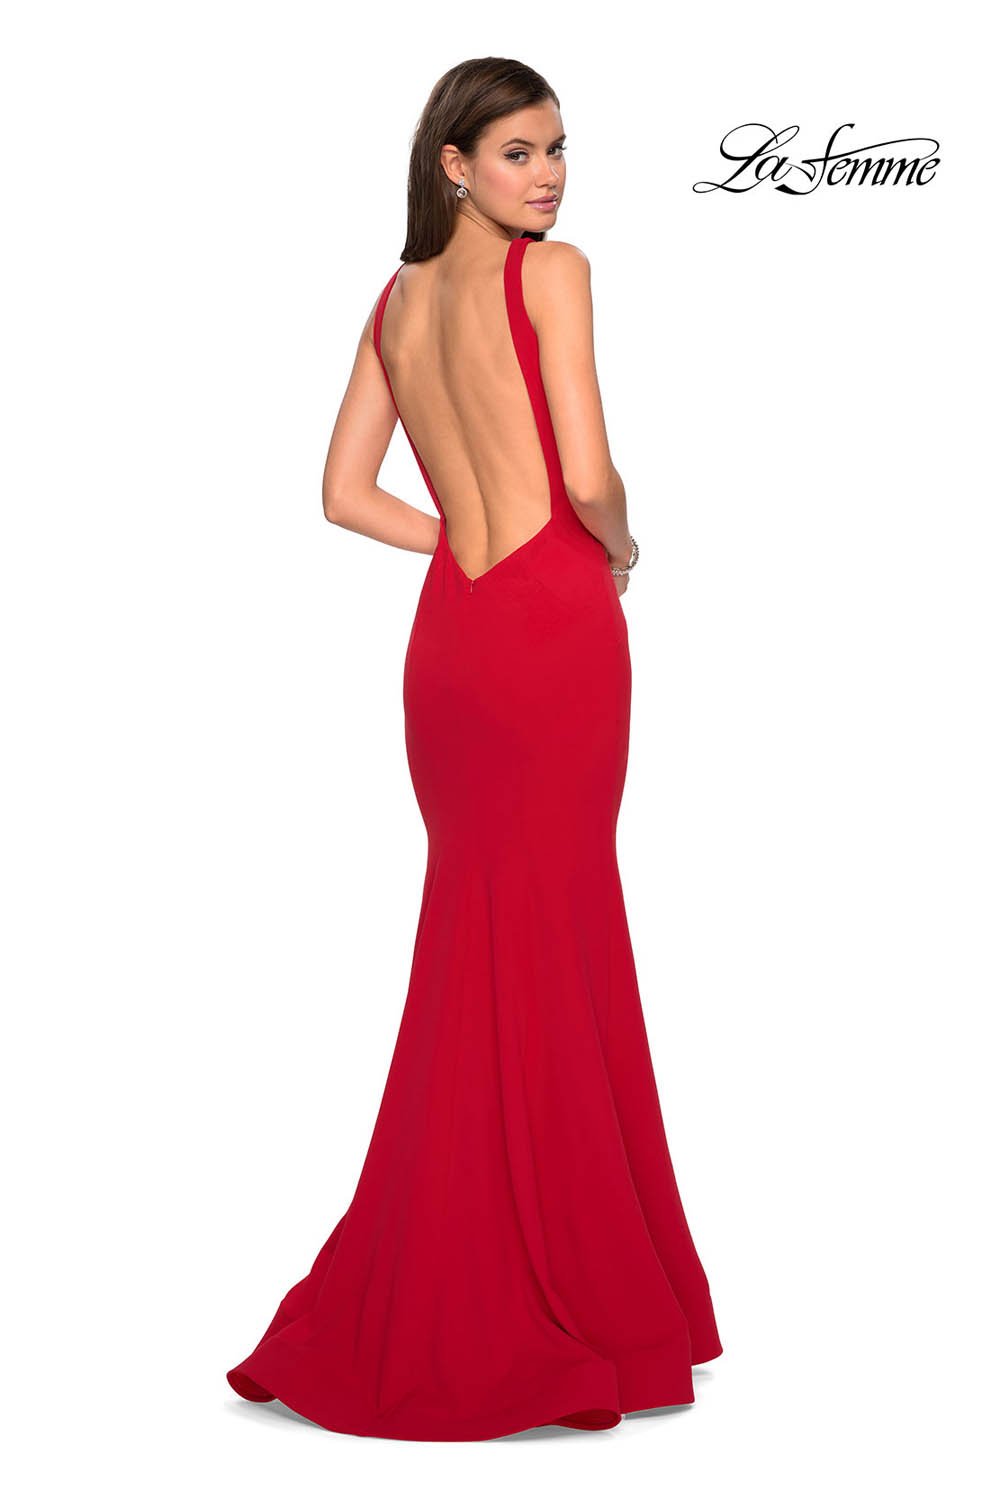 La Femme 27124 dress images in these colors: Black, Red, Sapphire Blue, White.